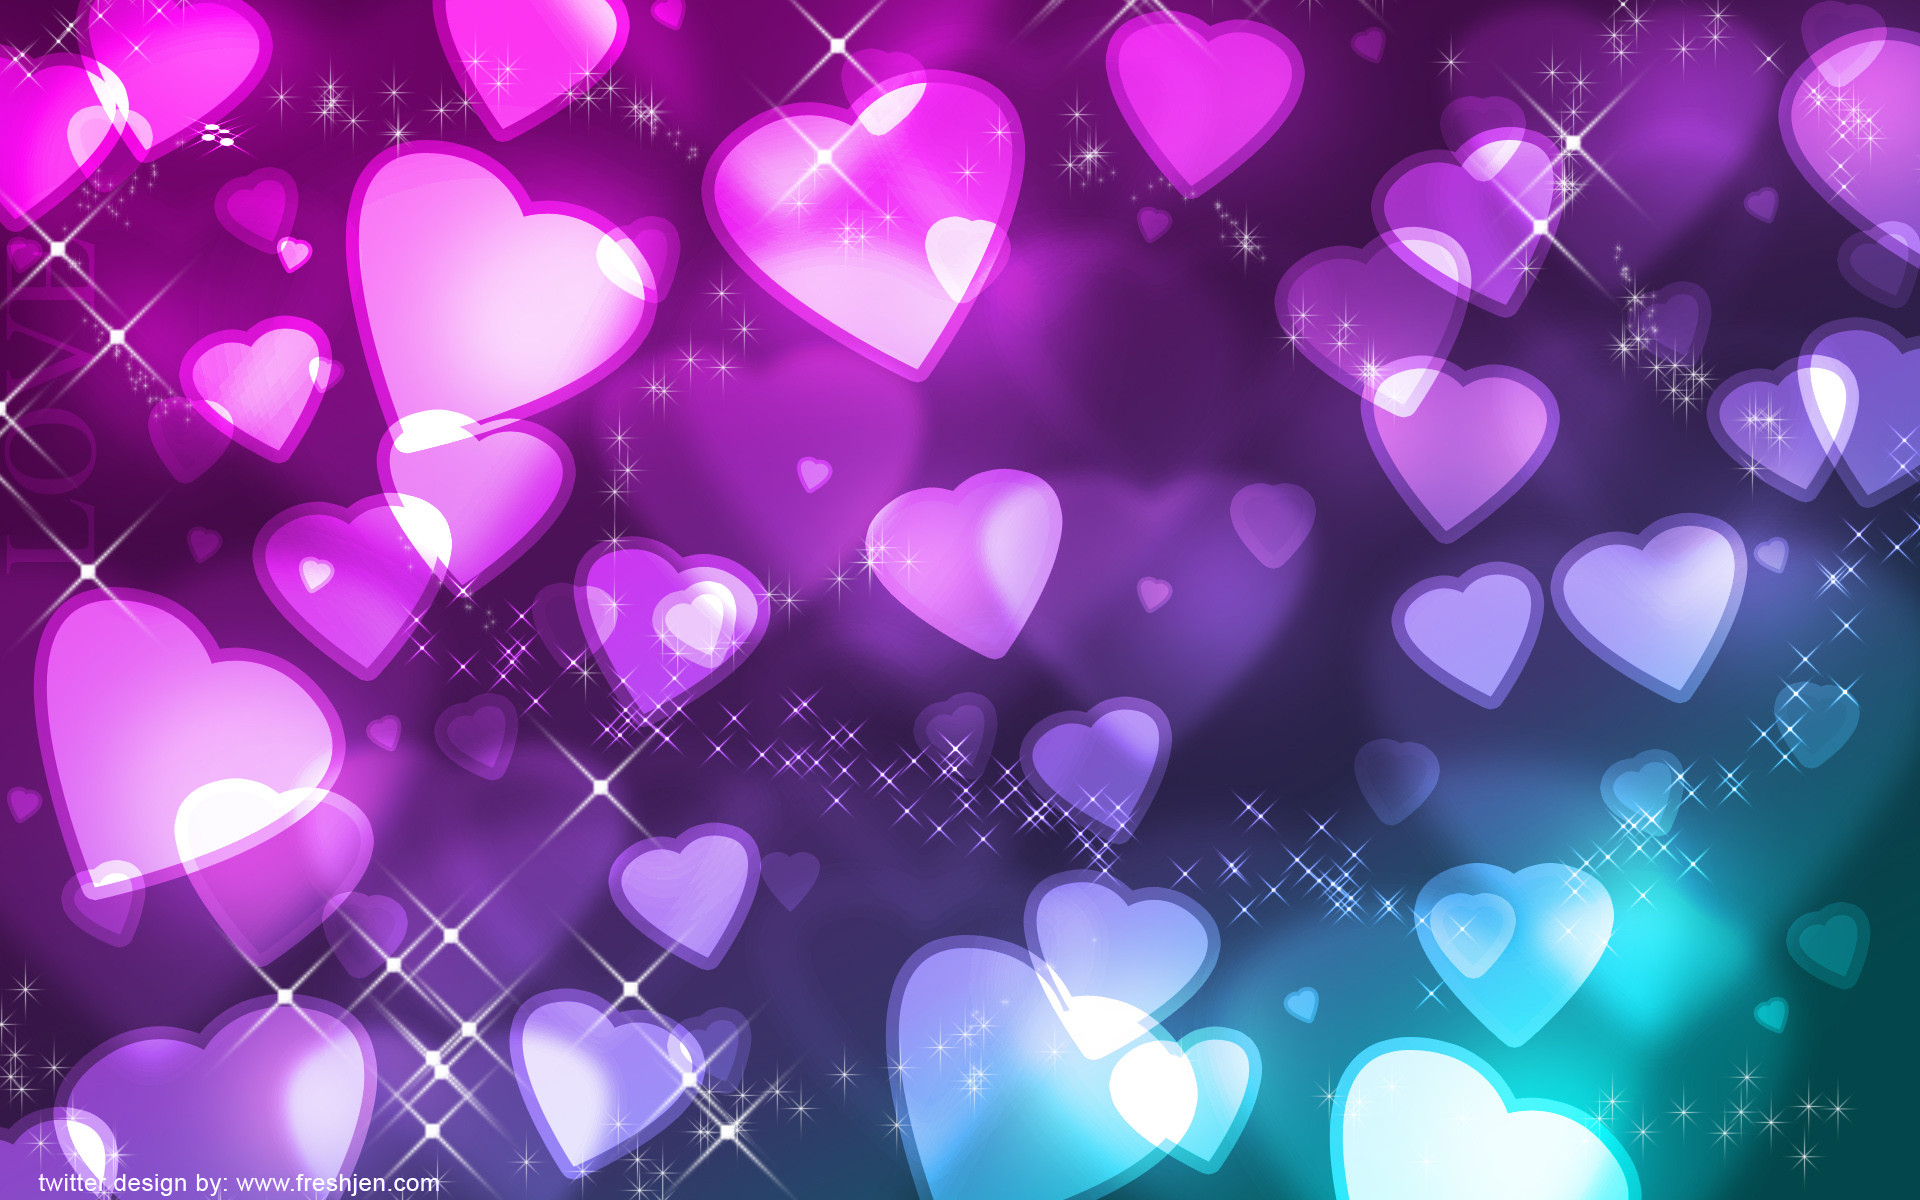 1920x1200 ... pink heart background - Google Search | Pink Hearts | Pinterest ... Pretty  Purple Backgrounds ...